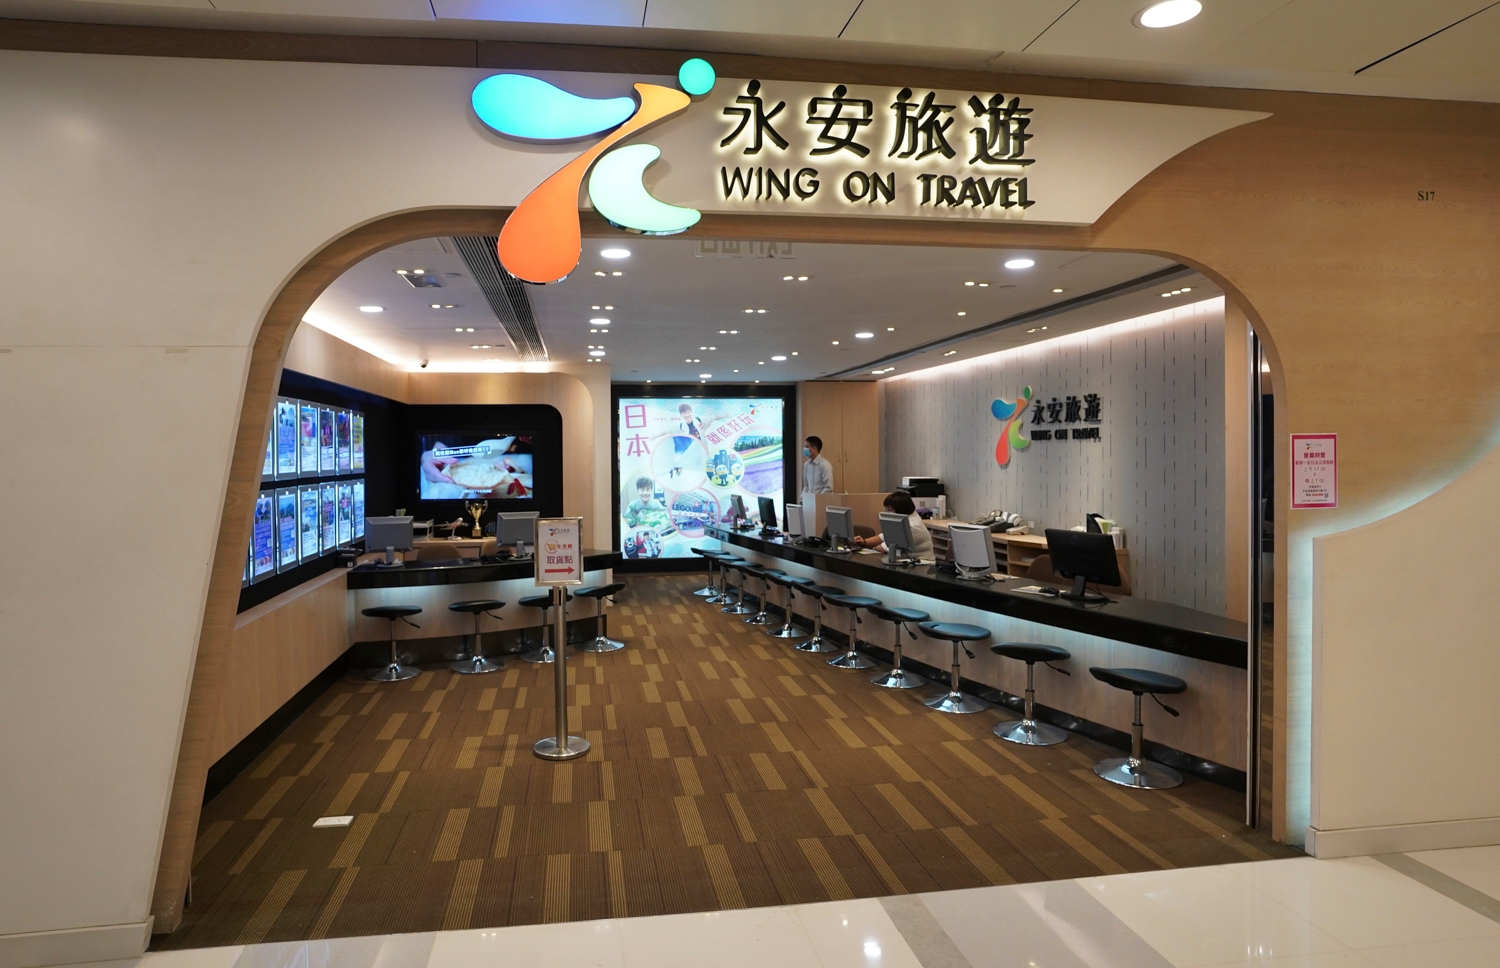 wing on travel wiki